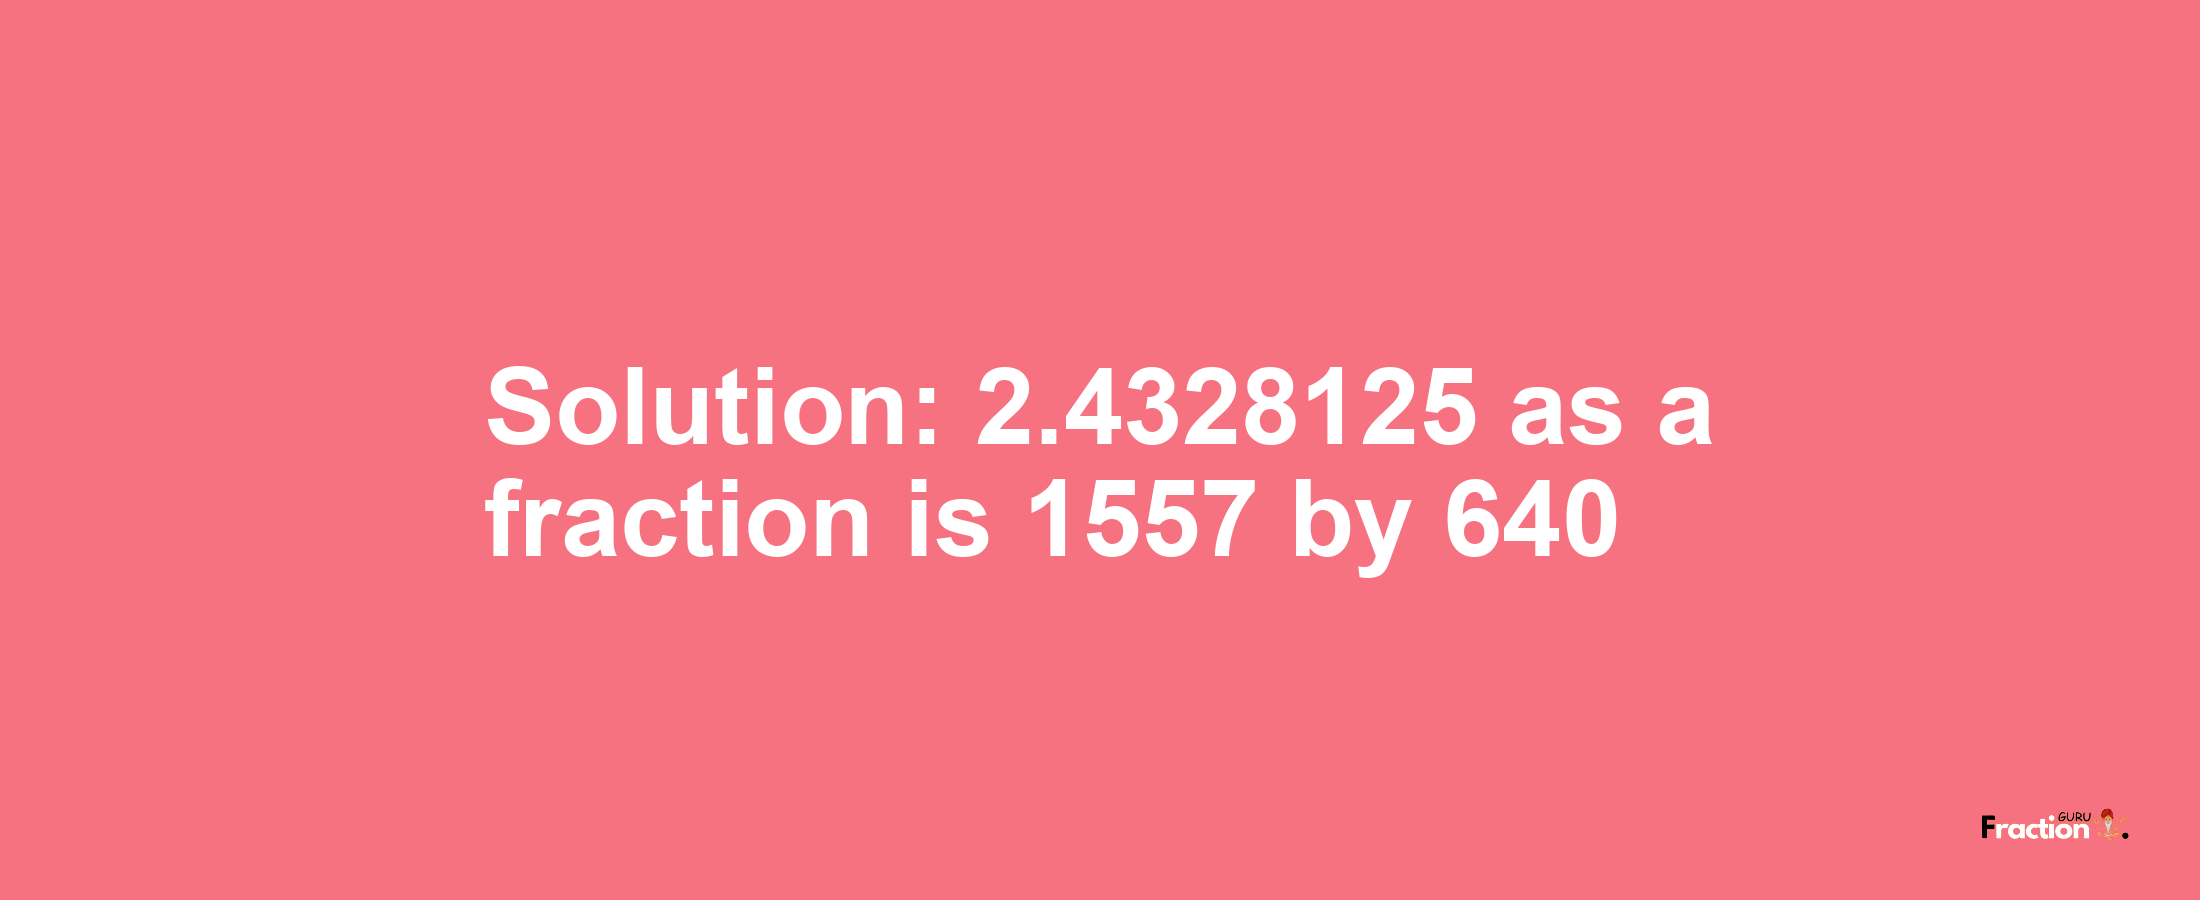 Solution:2.4328125 as a fraction is 1557/640